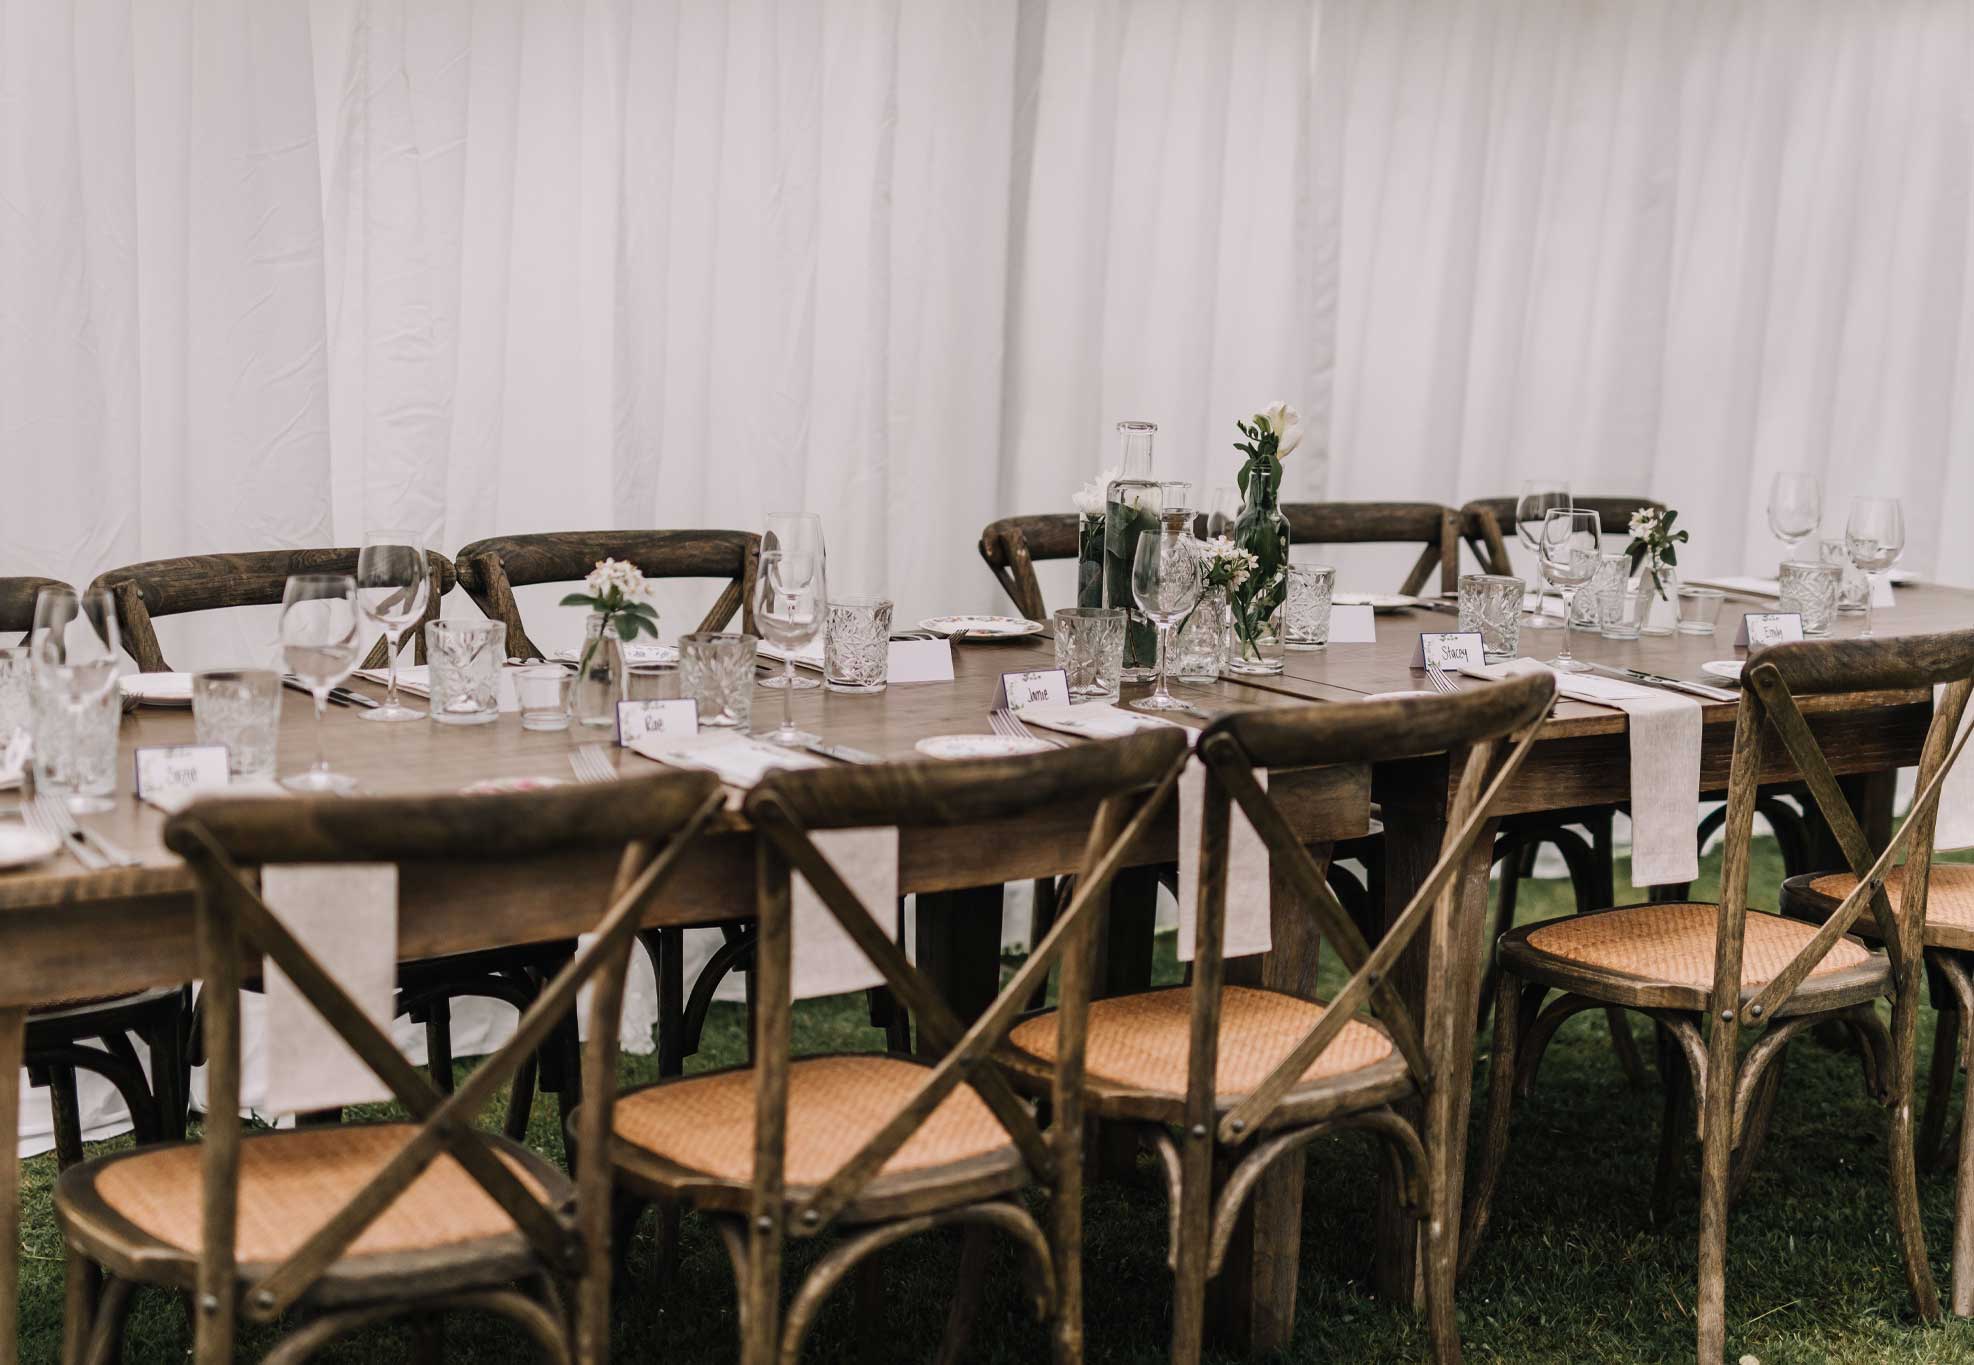 silk-estate-marquee-weddings-and-events-styling-and-hire-furniture-chairs-crossback-1